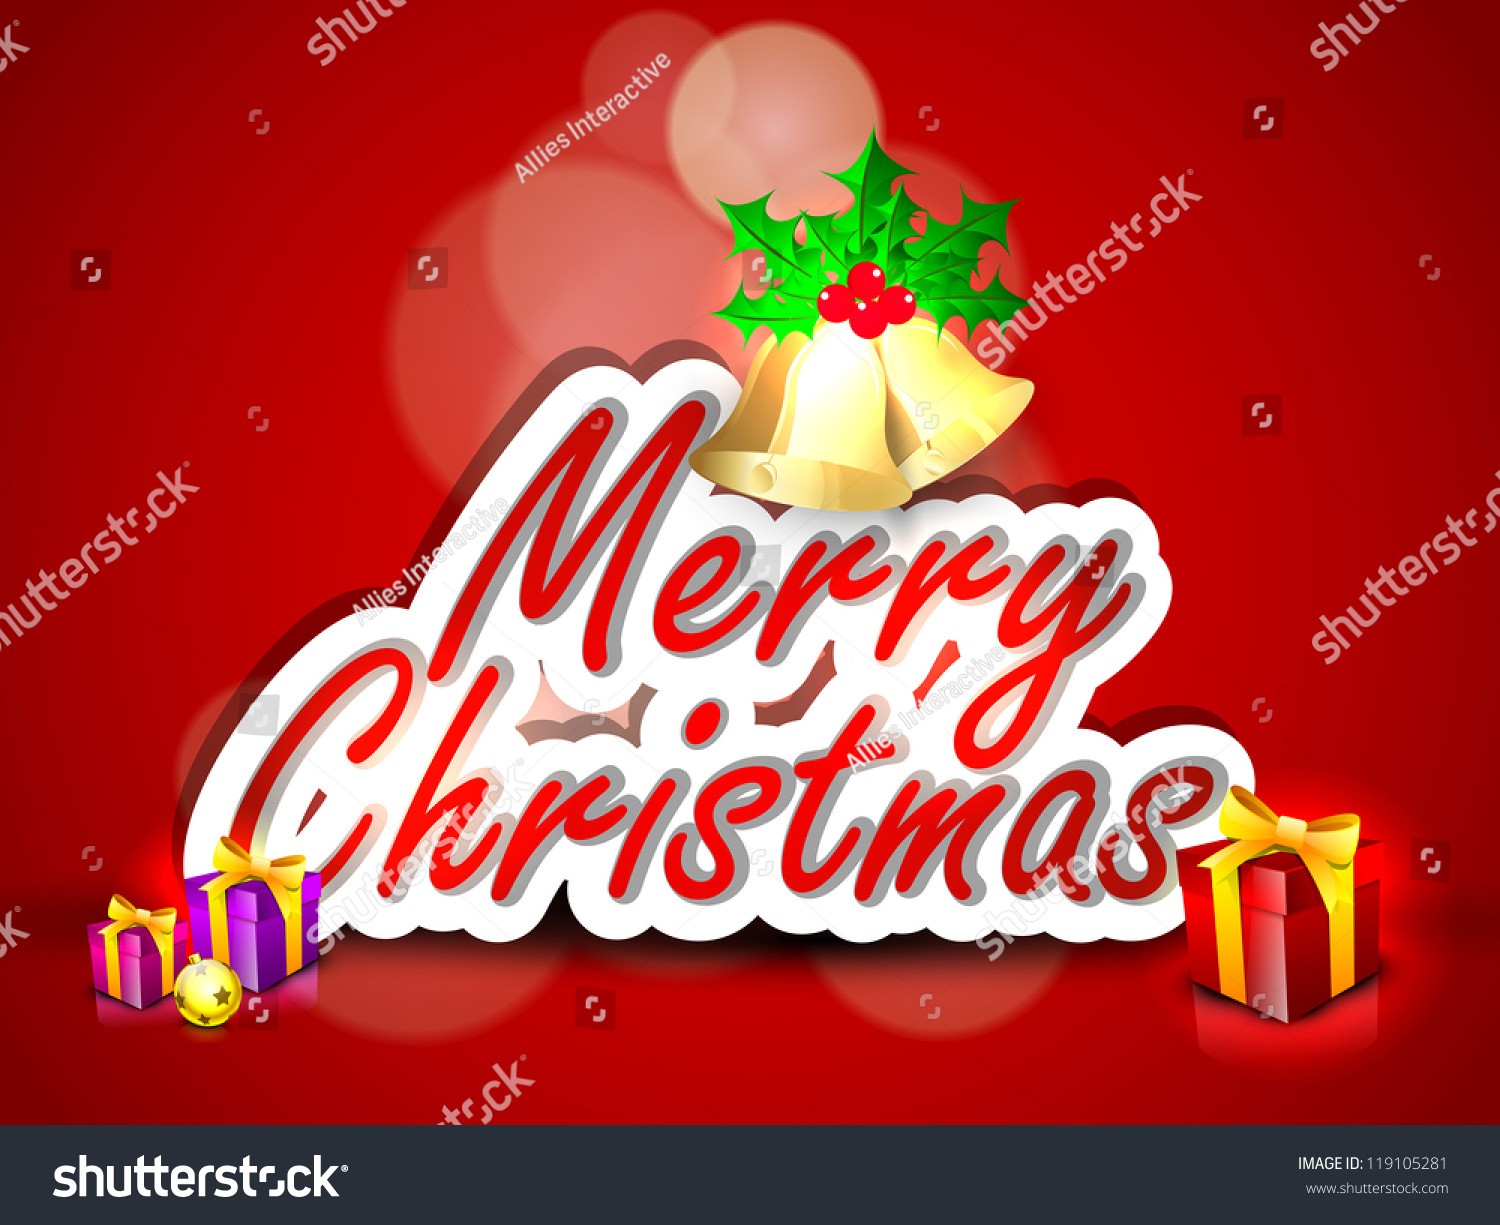 Merry Christmas Greeting Gift Invitation Card Stock Vector Royalty